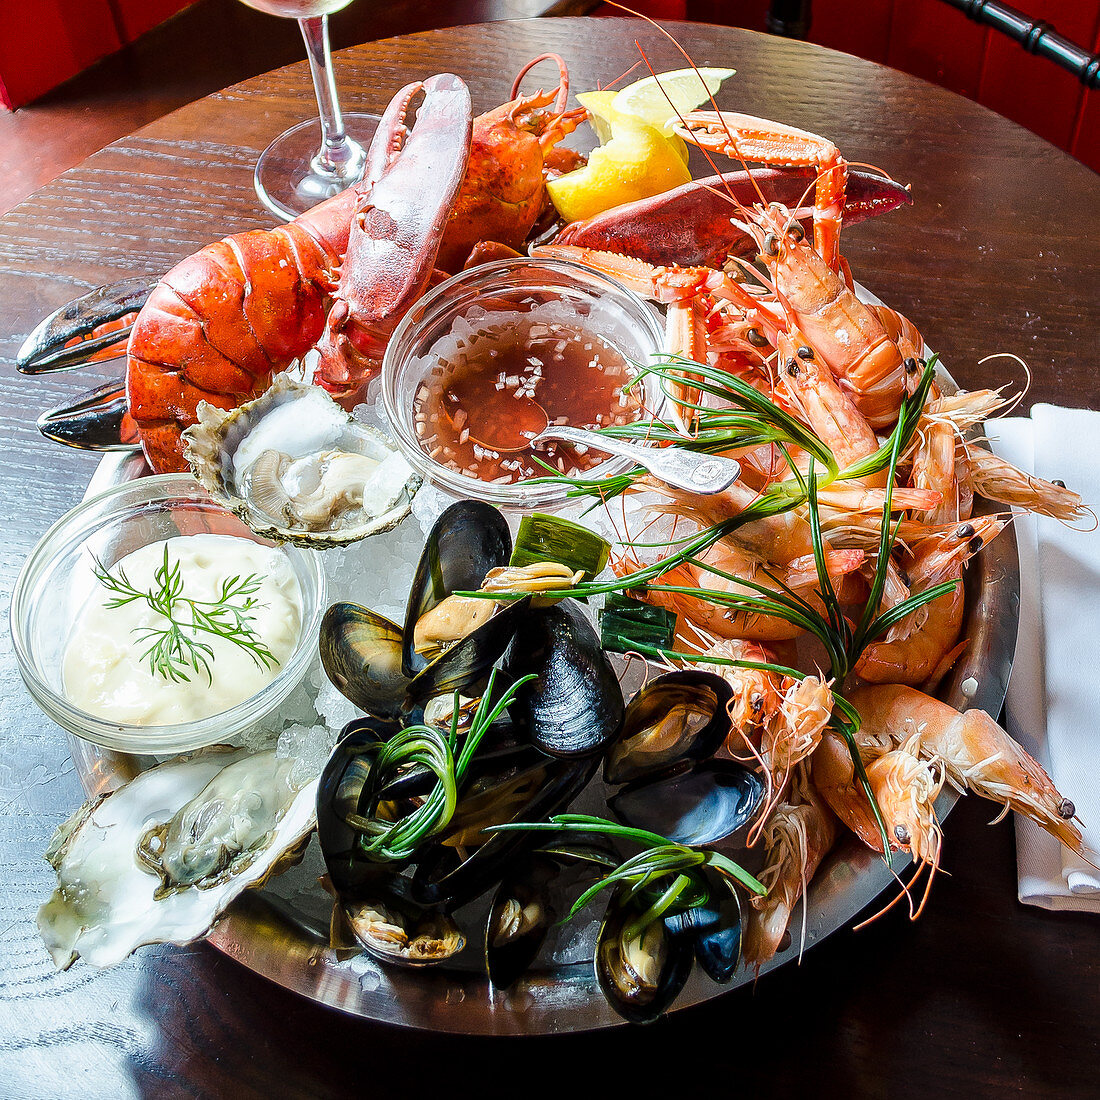 Fresh seafood platter with red lobster, langoustine, prawns, mussels, oysters, clams, with a tartare and sweet chilli sauce